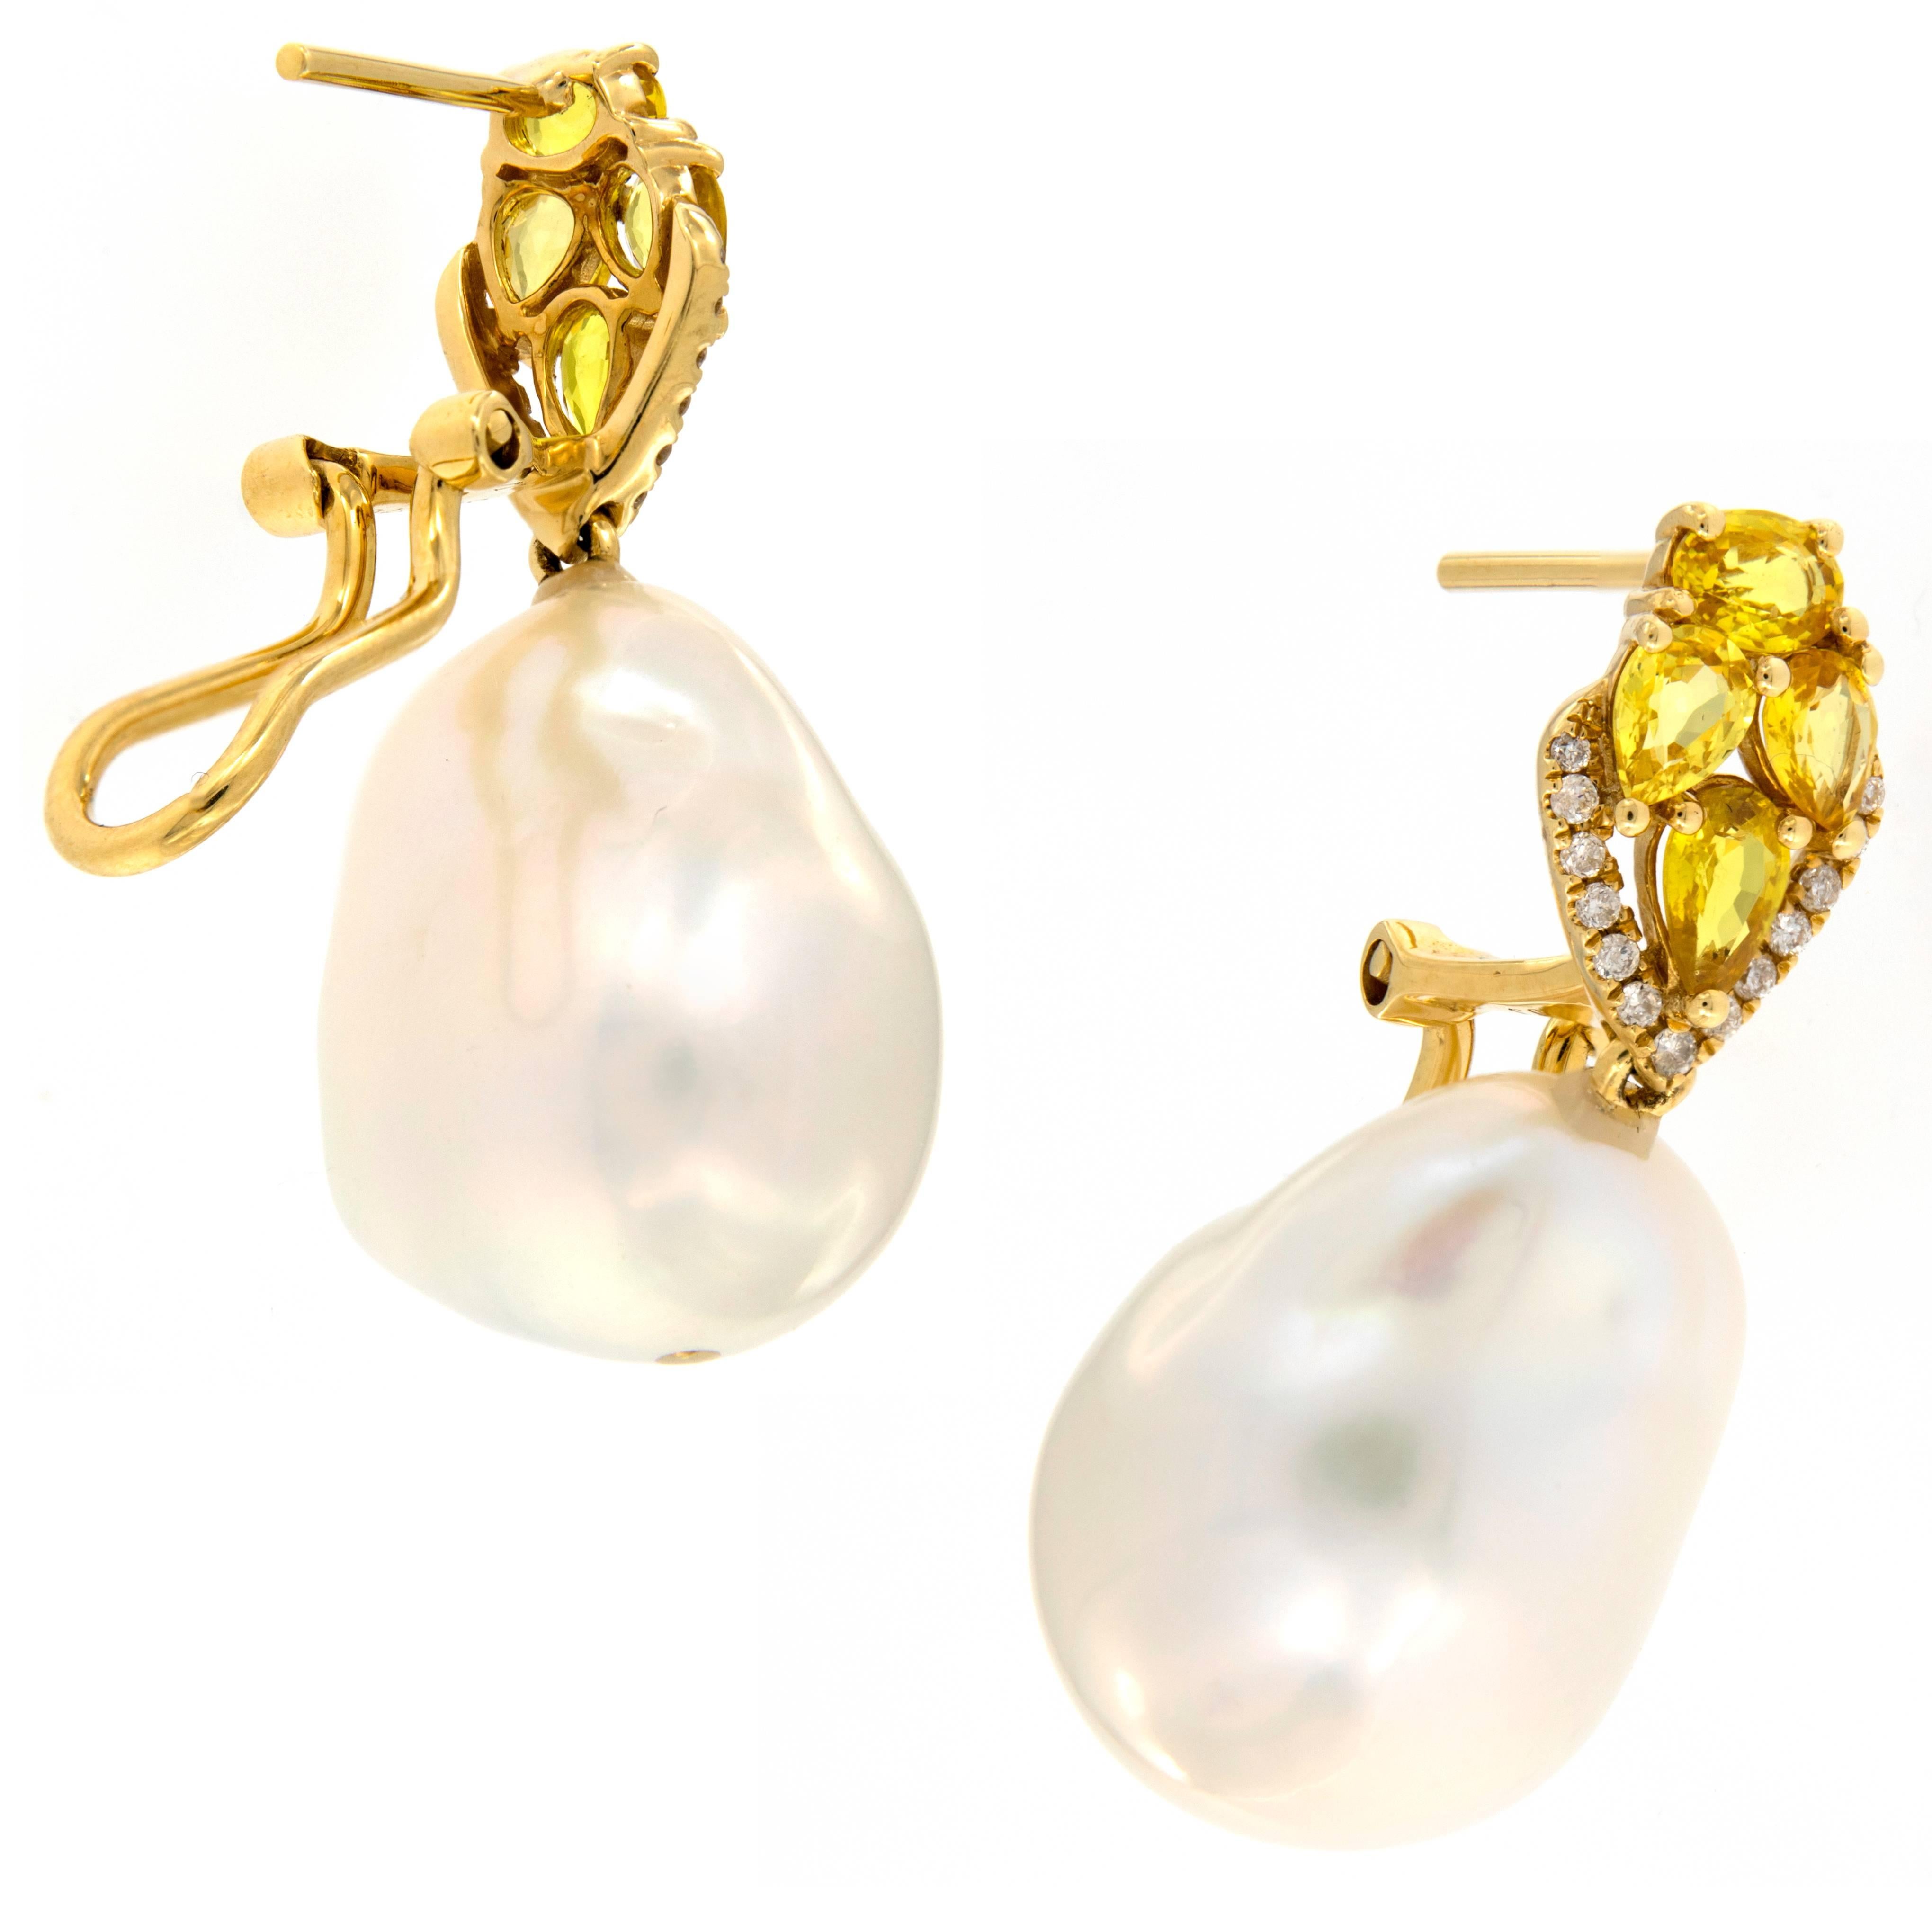 Lovely baroque pearl drop earrings crafted in 18k yellow gold drop from yellow sapphire clusters  accented with a row of diamonds. Omega clip backs. Weigh 13.4 grams.
Sapphires 1.70 cttw
Diamonds 0.17 cttw.